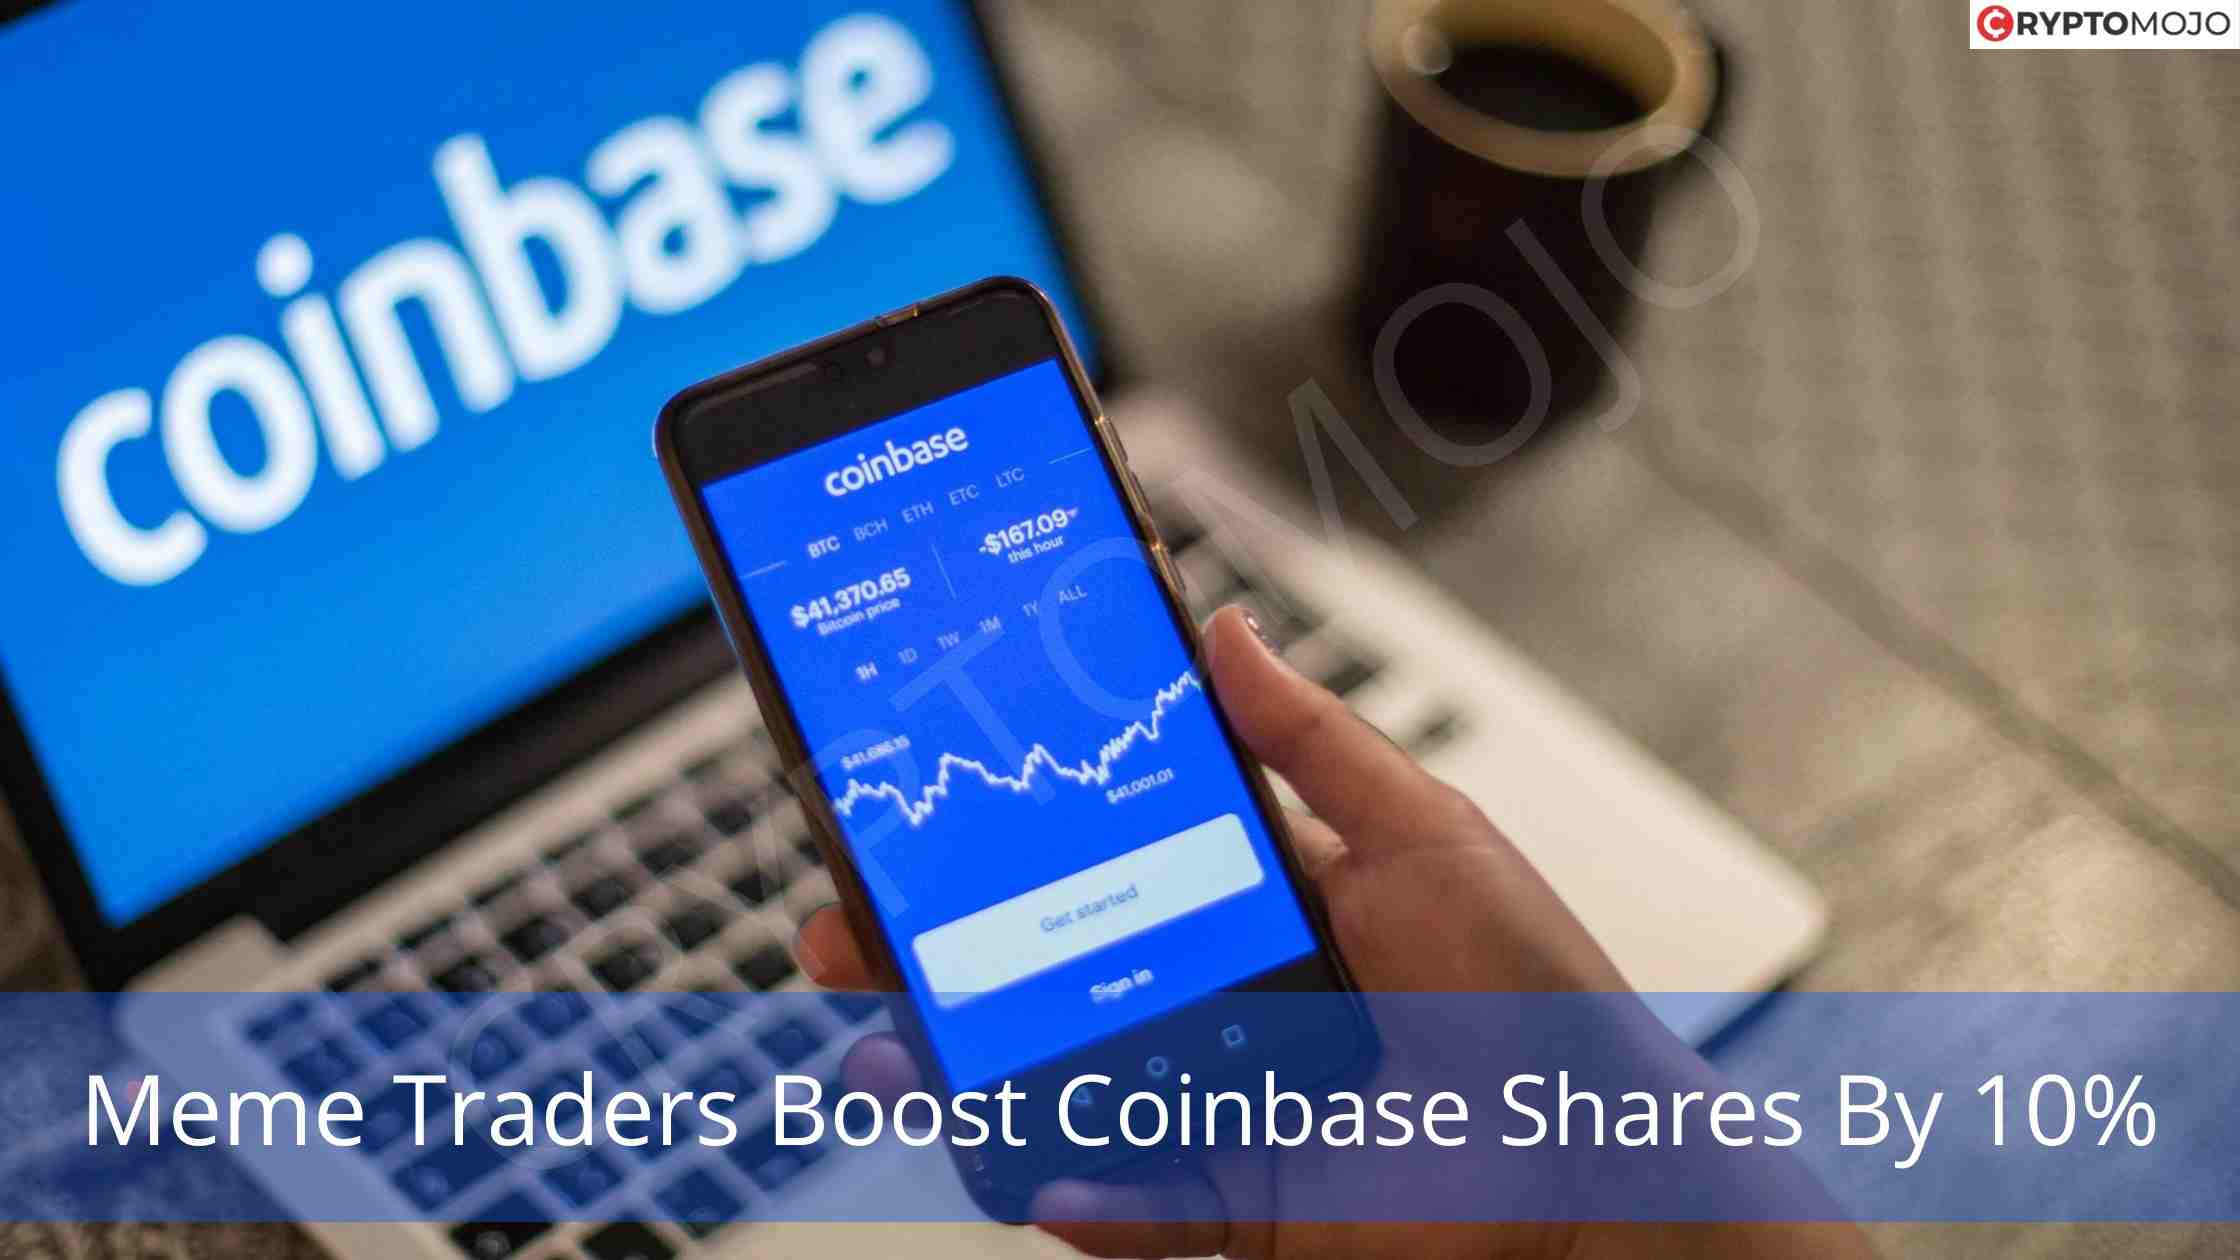 Meme Traders Boost Coinbase Shares By 10%!